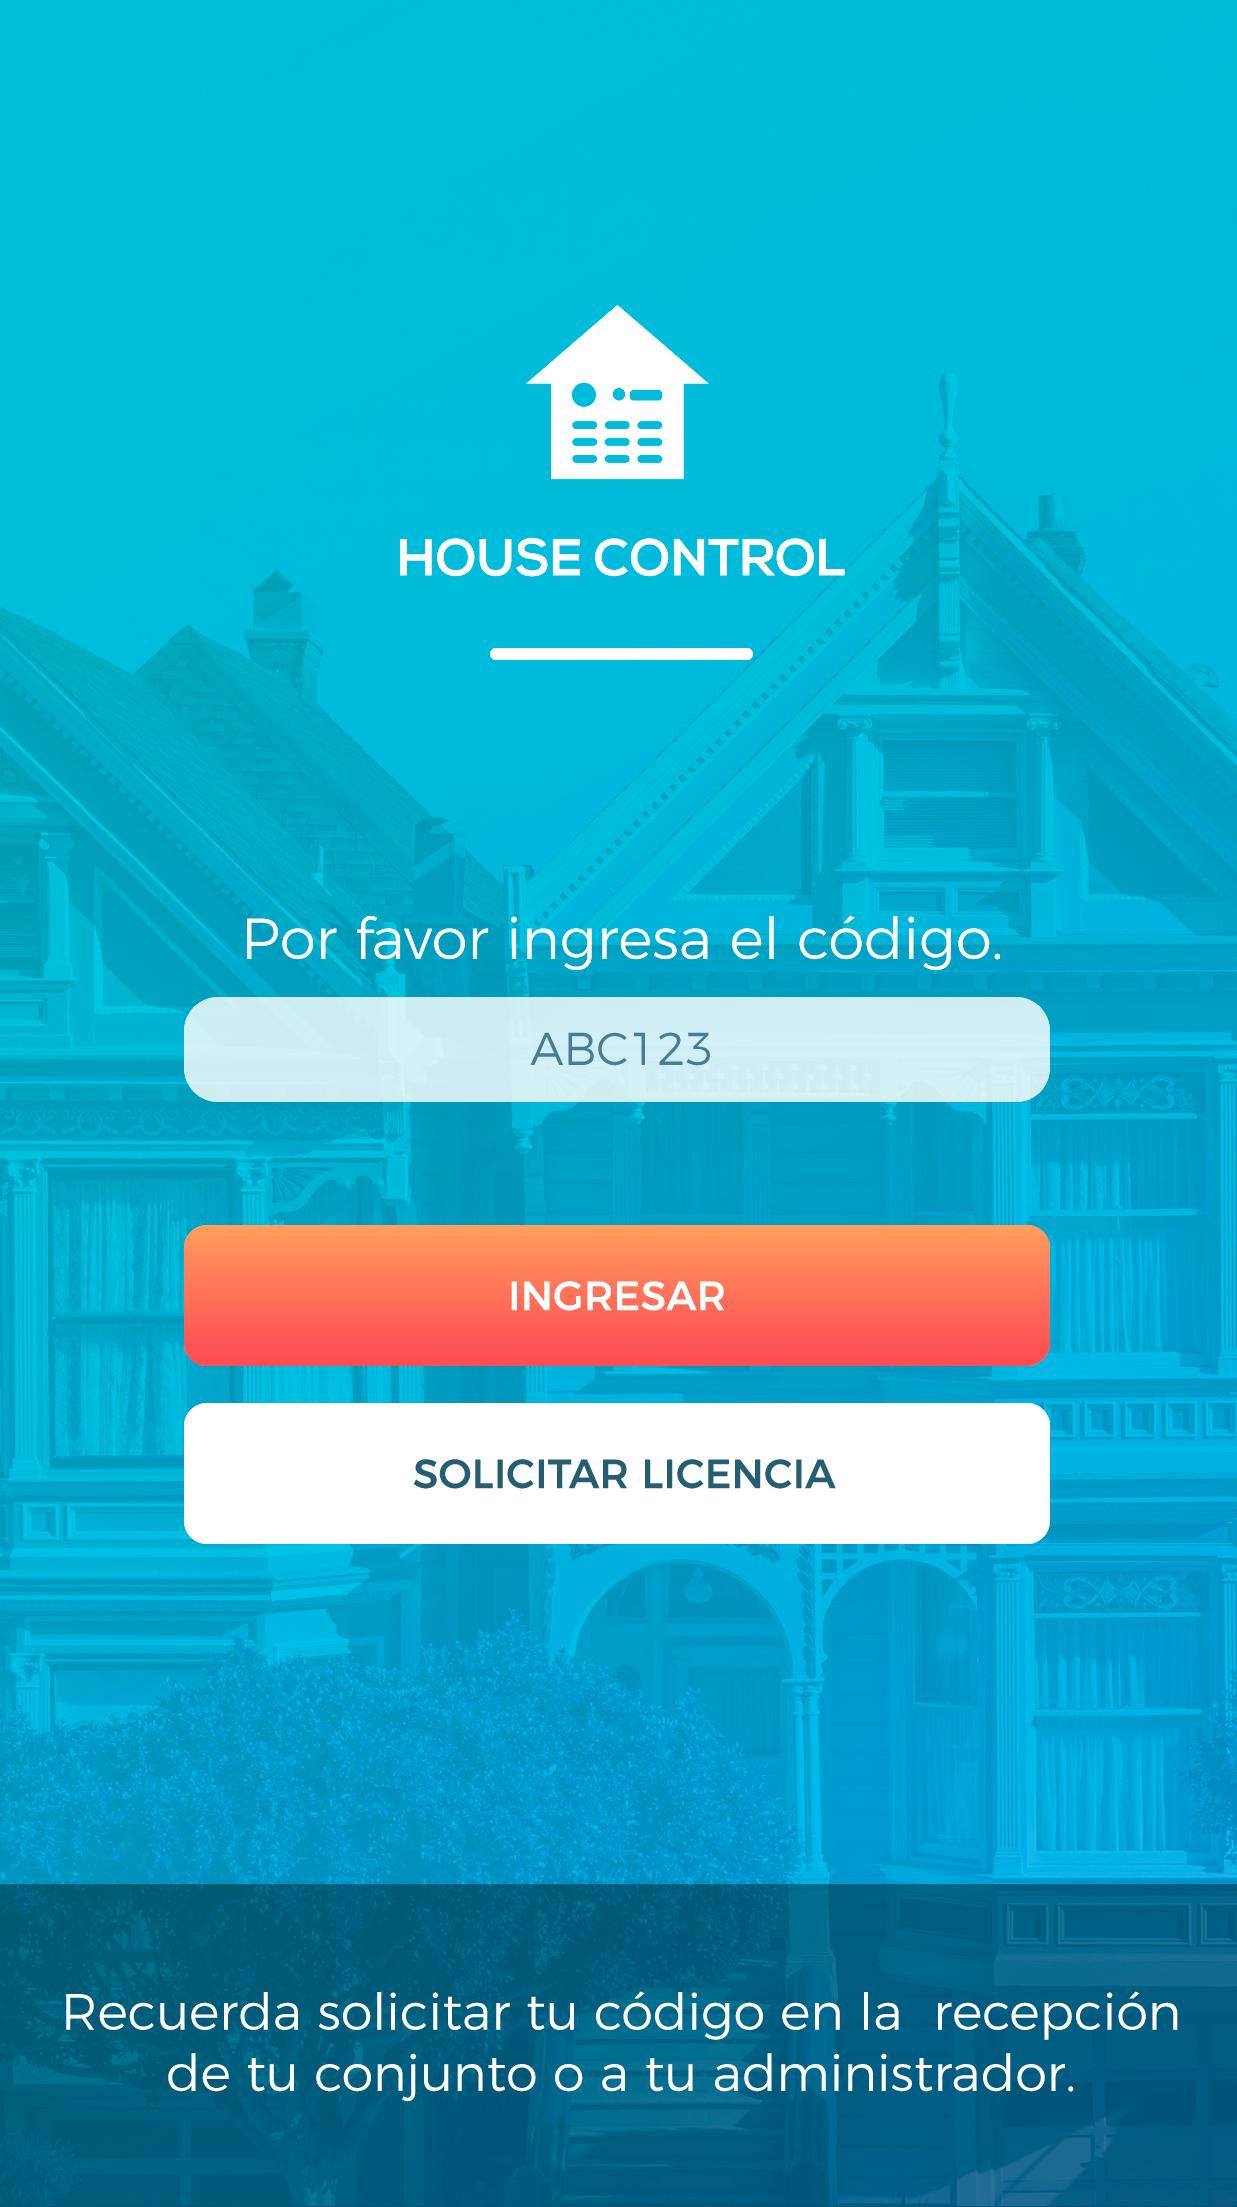 House control